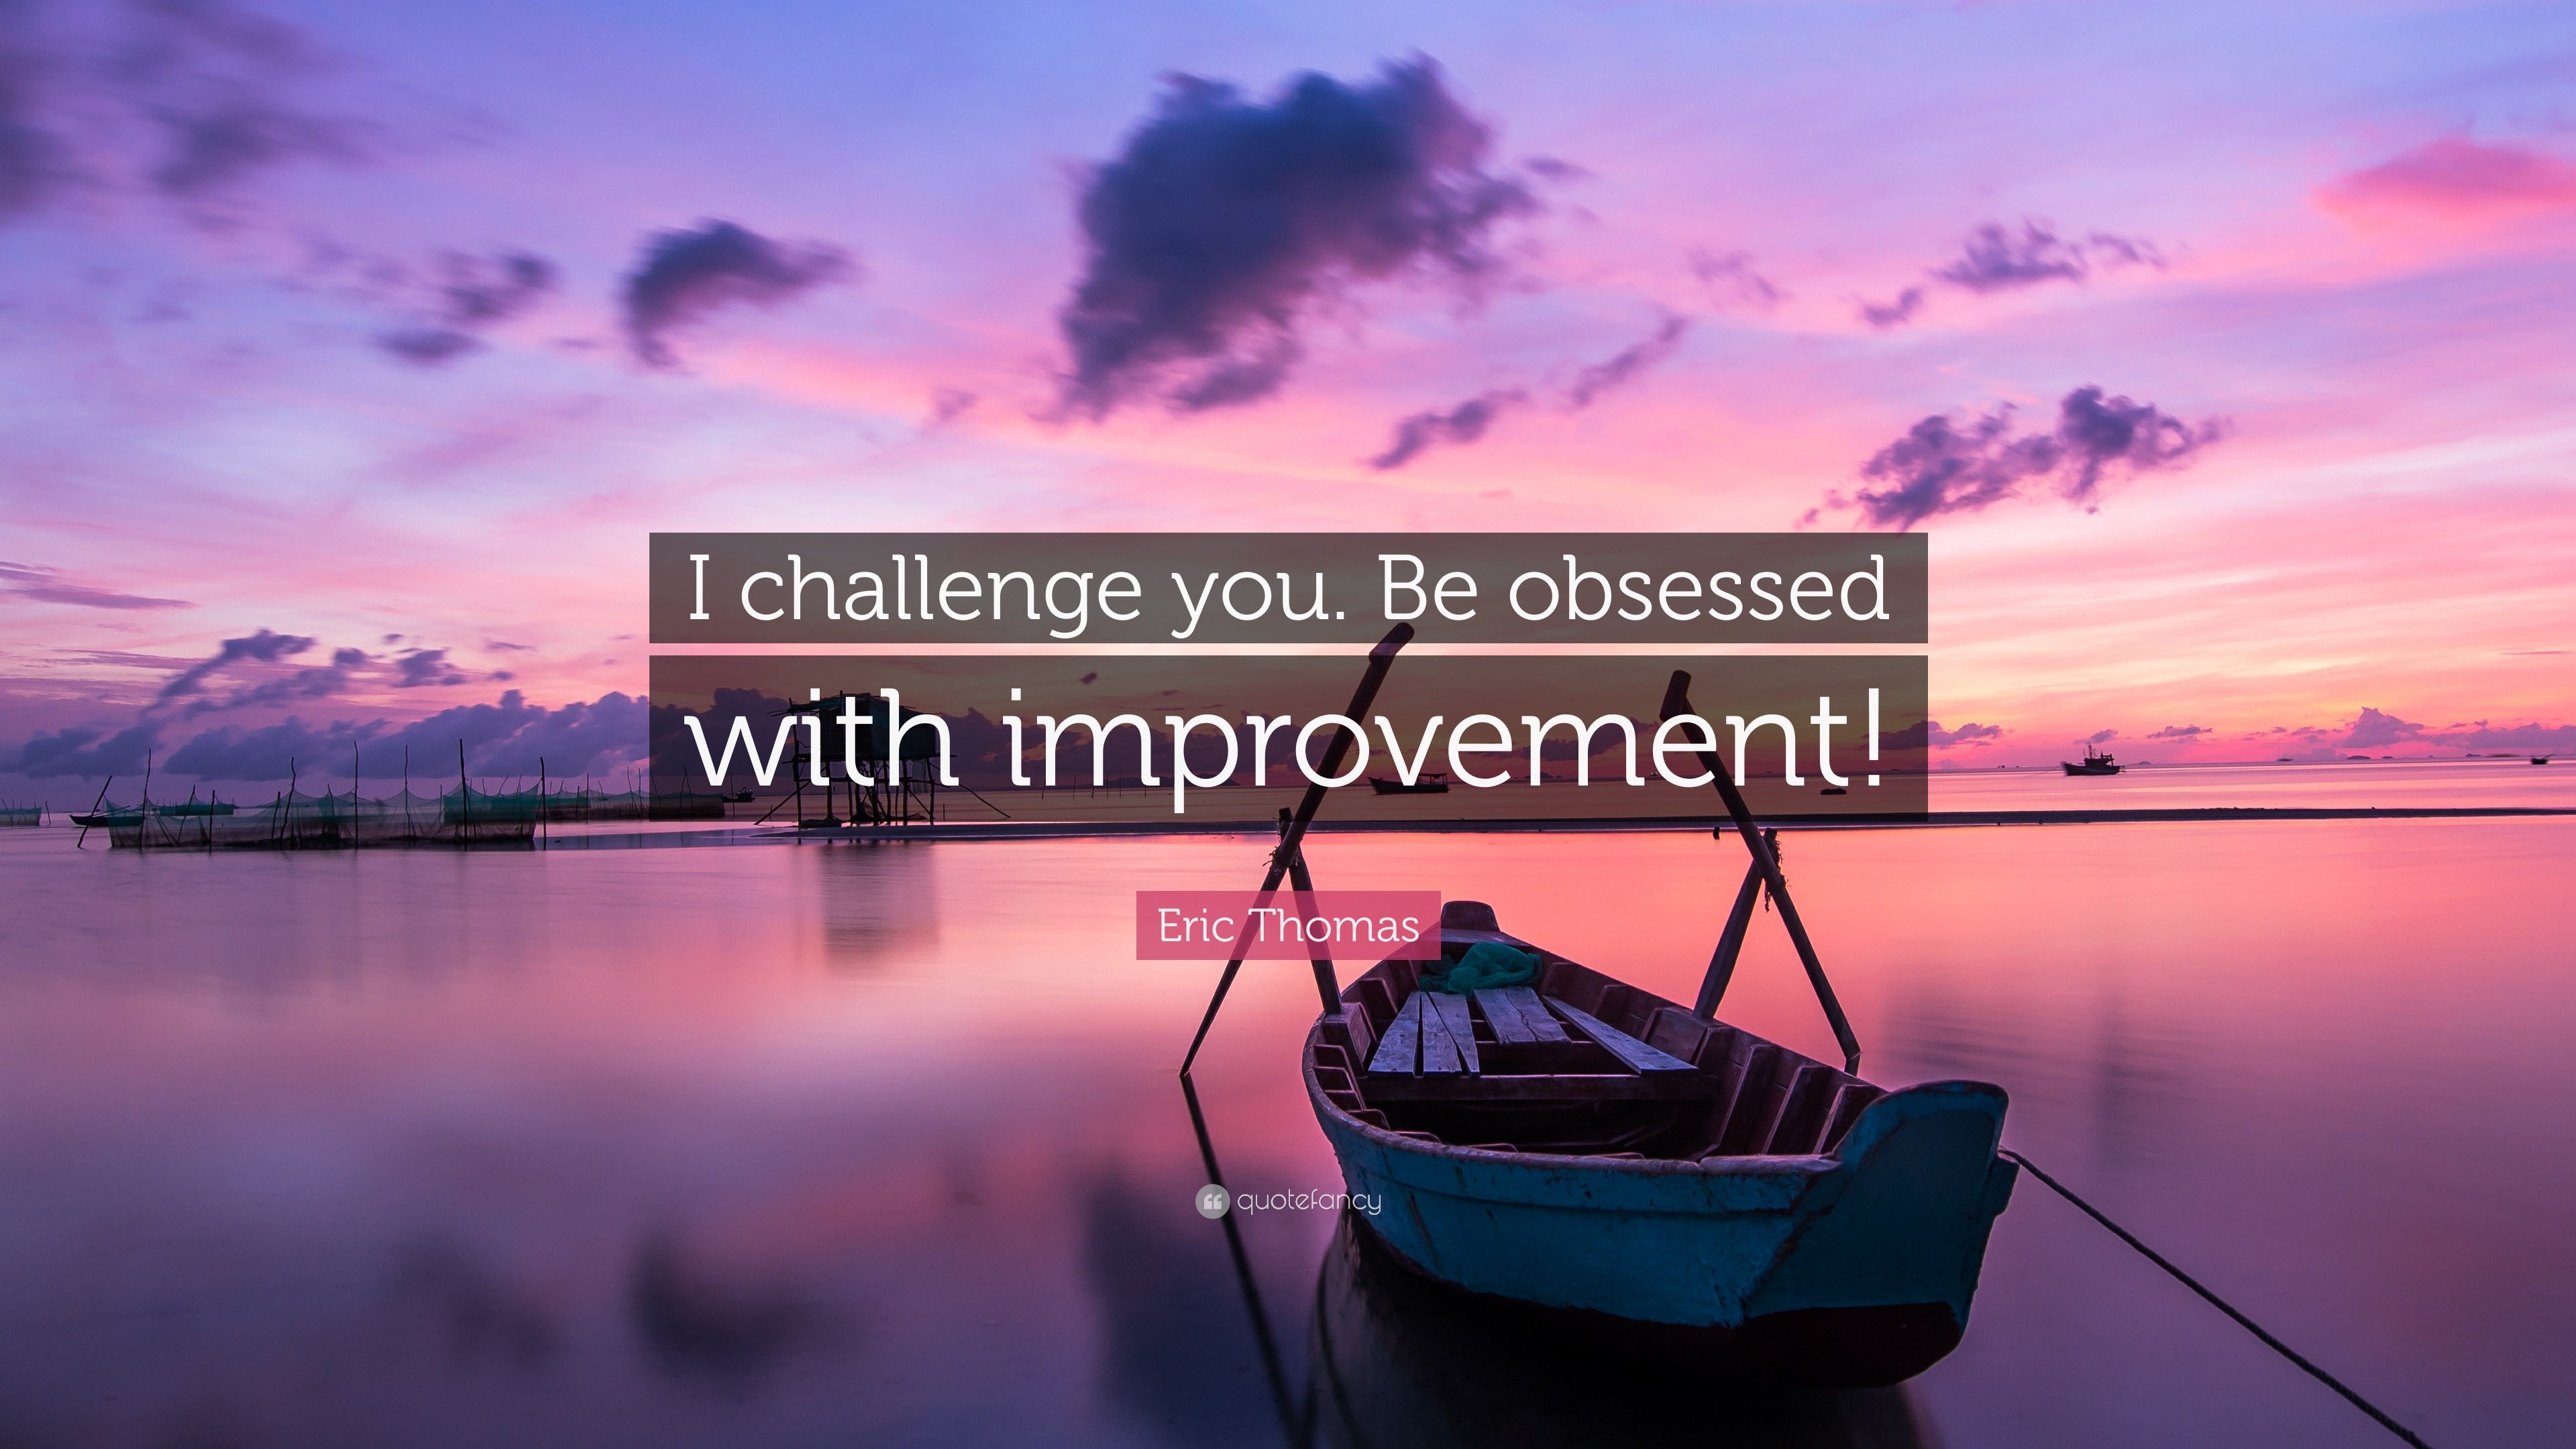 Eric Thomas Quote: “I challenge you. Be obsessed with improvement!” (12